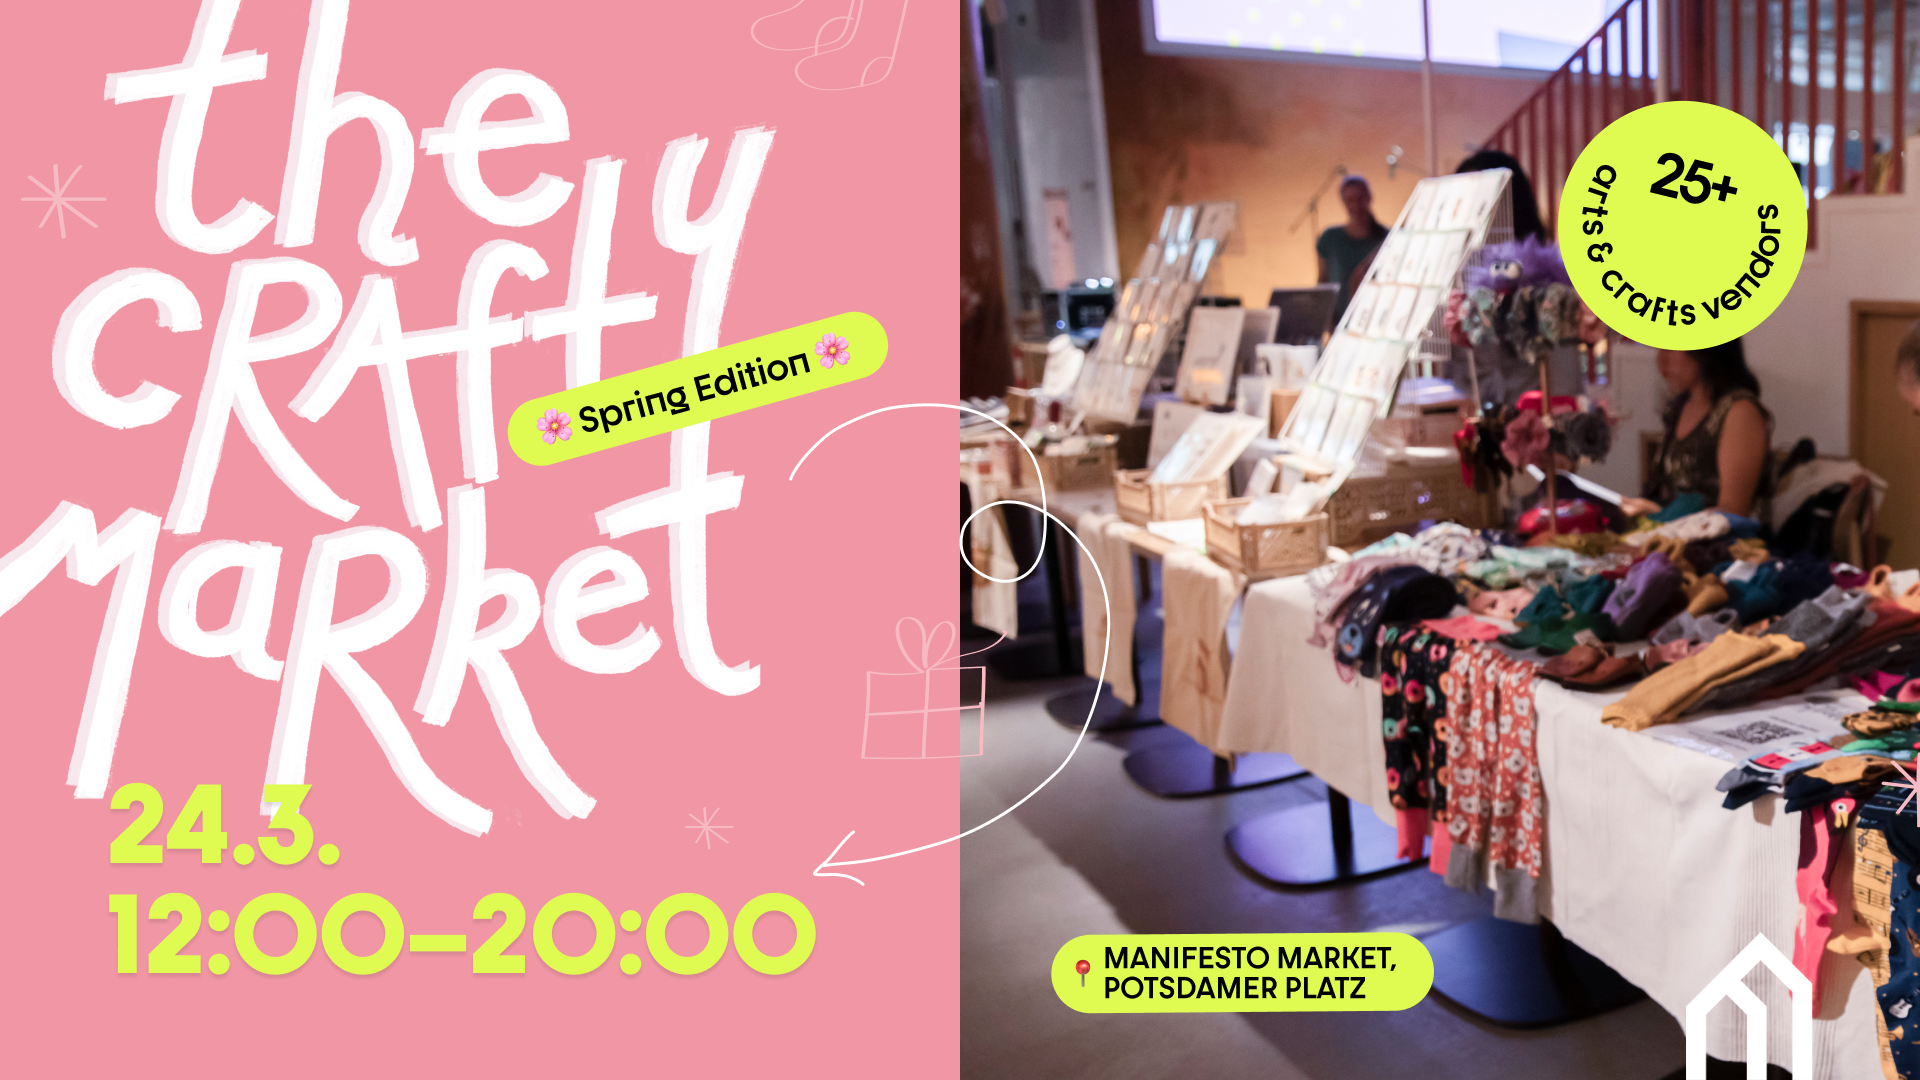 The Crafty Market ⎮ Spring Edition